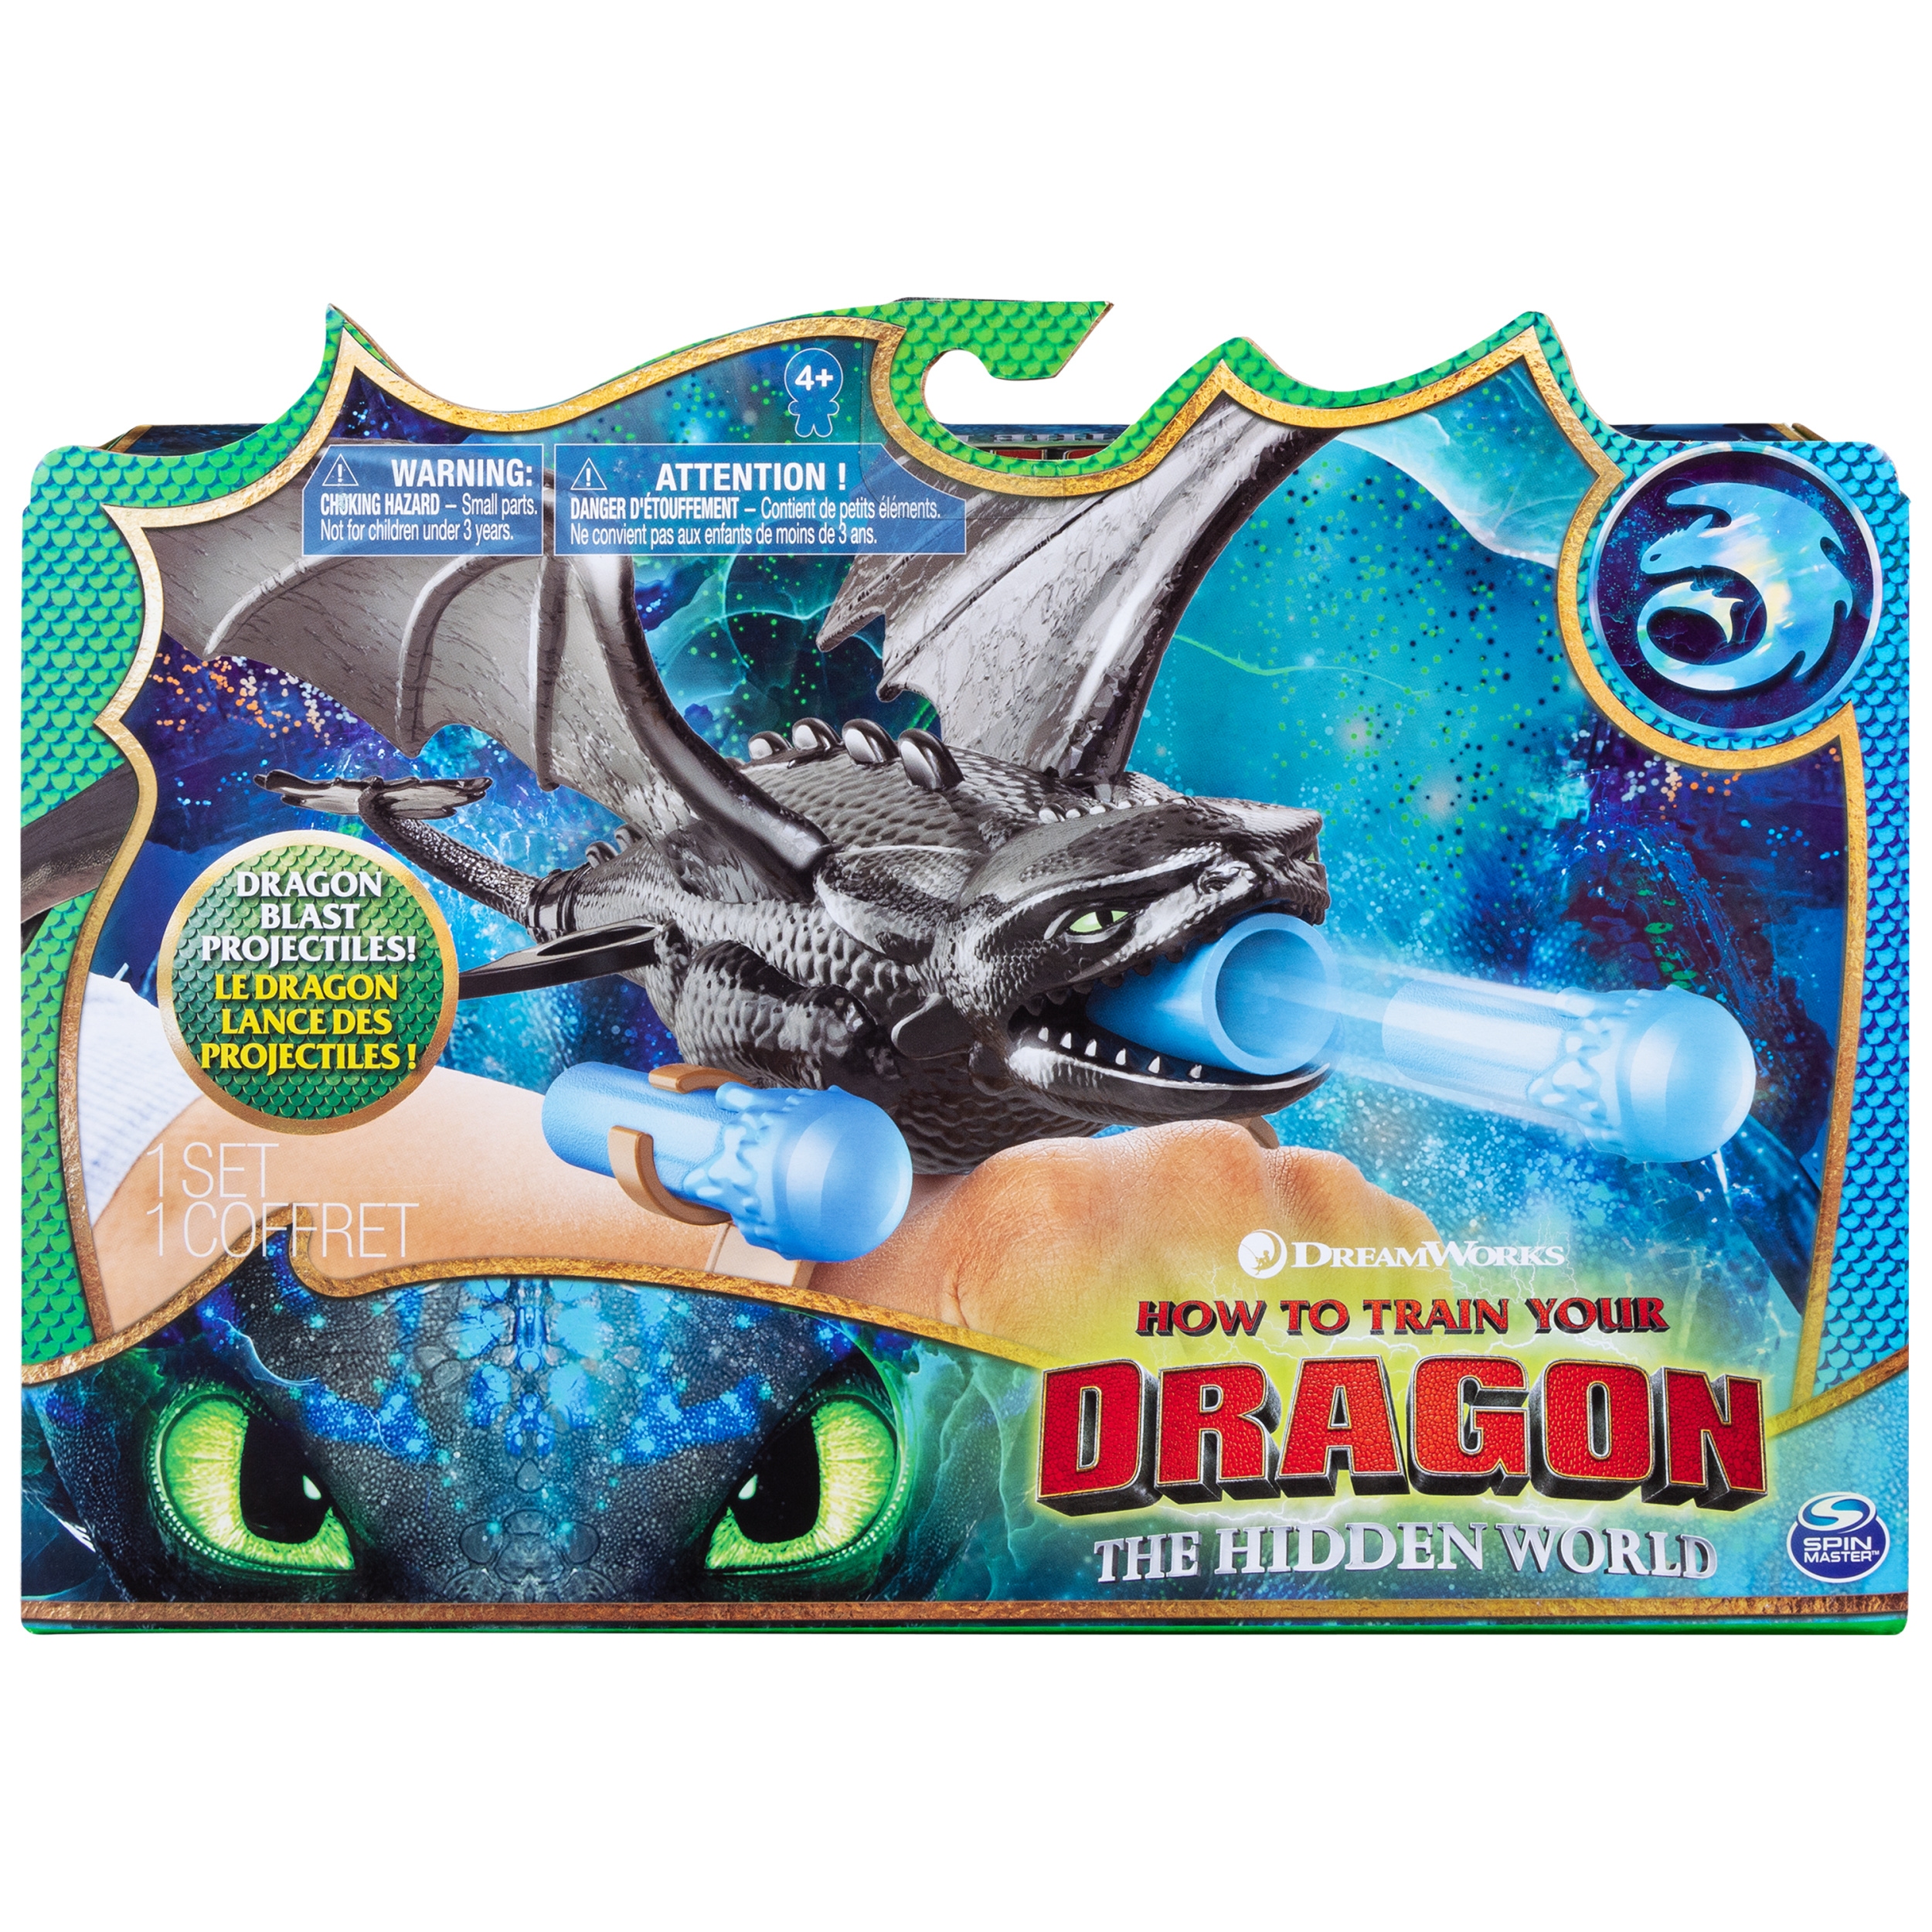 DreamWorks Dragons Toothless Wrist Launcher, Role-Play Launcher Accessory, for Kids Aged 4 and up - image 1 of 3